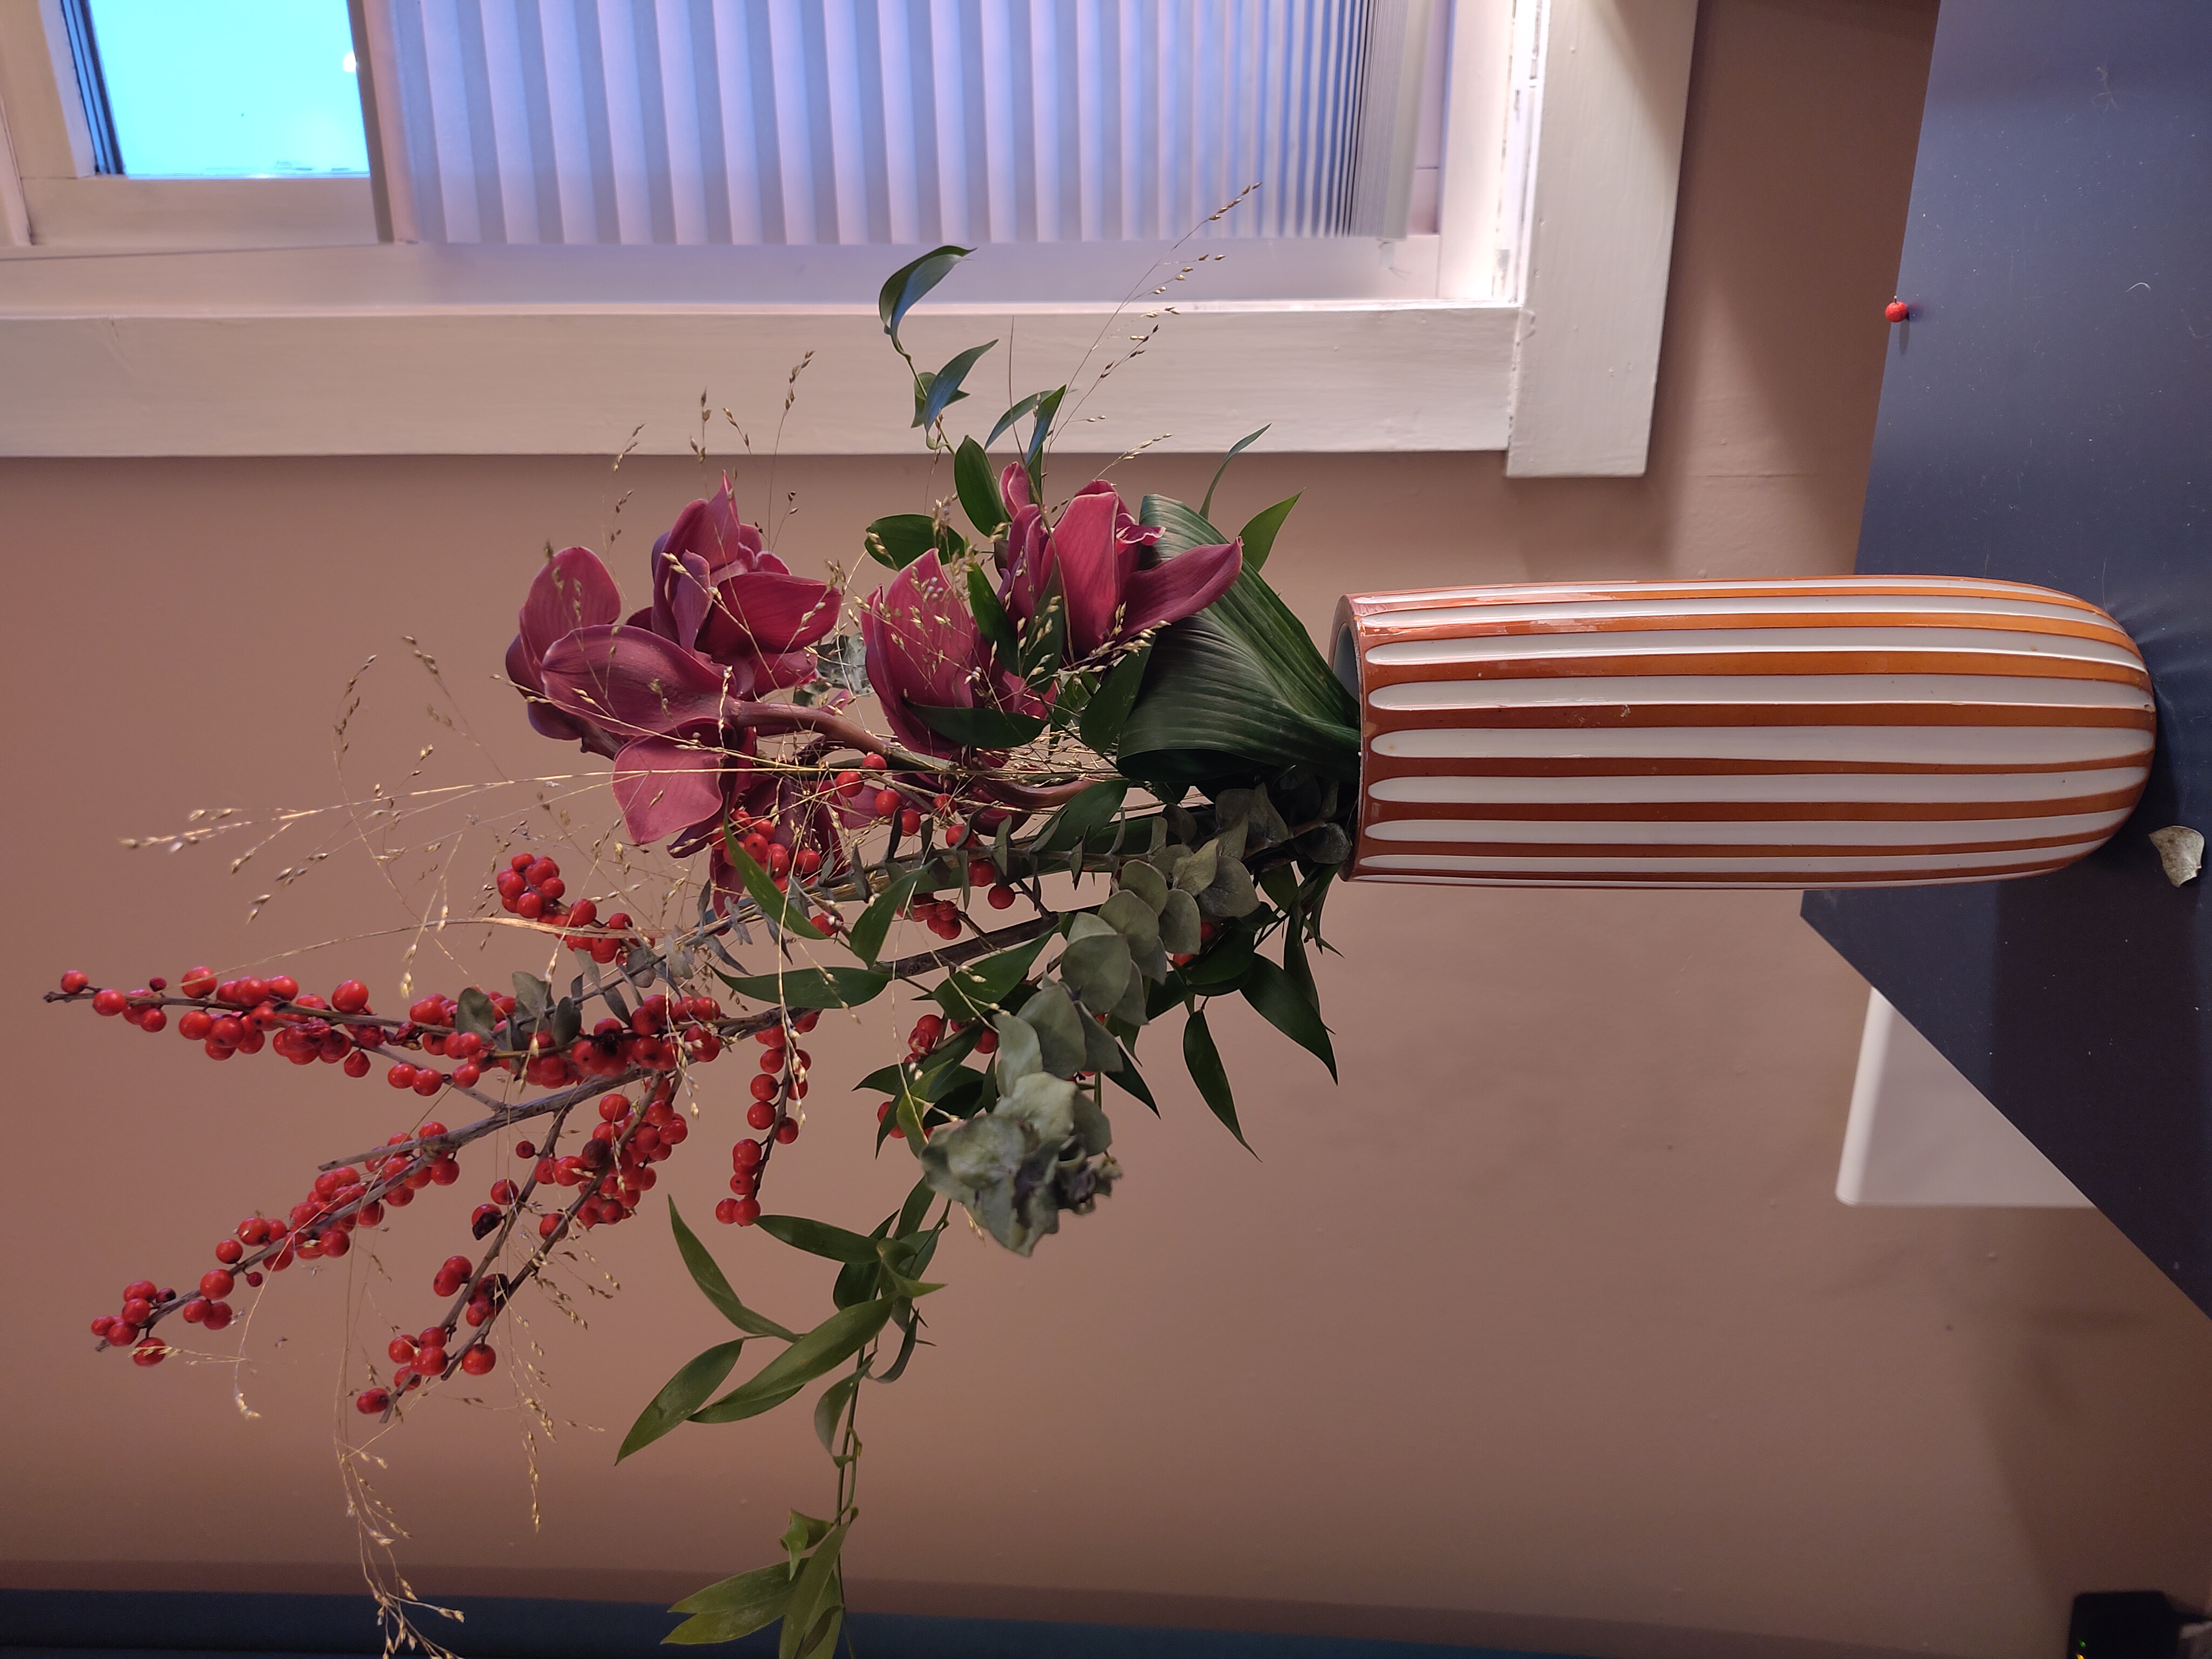 A photo showing flowers I received from my wife on the first day in my new job